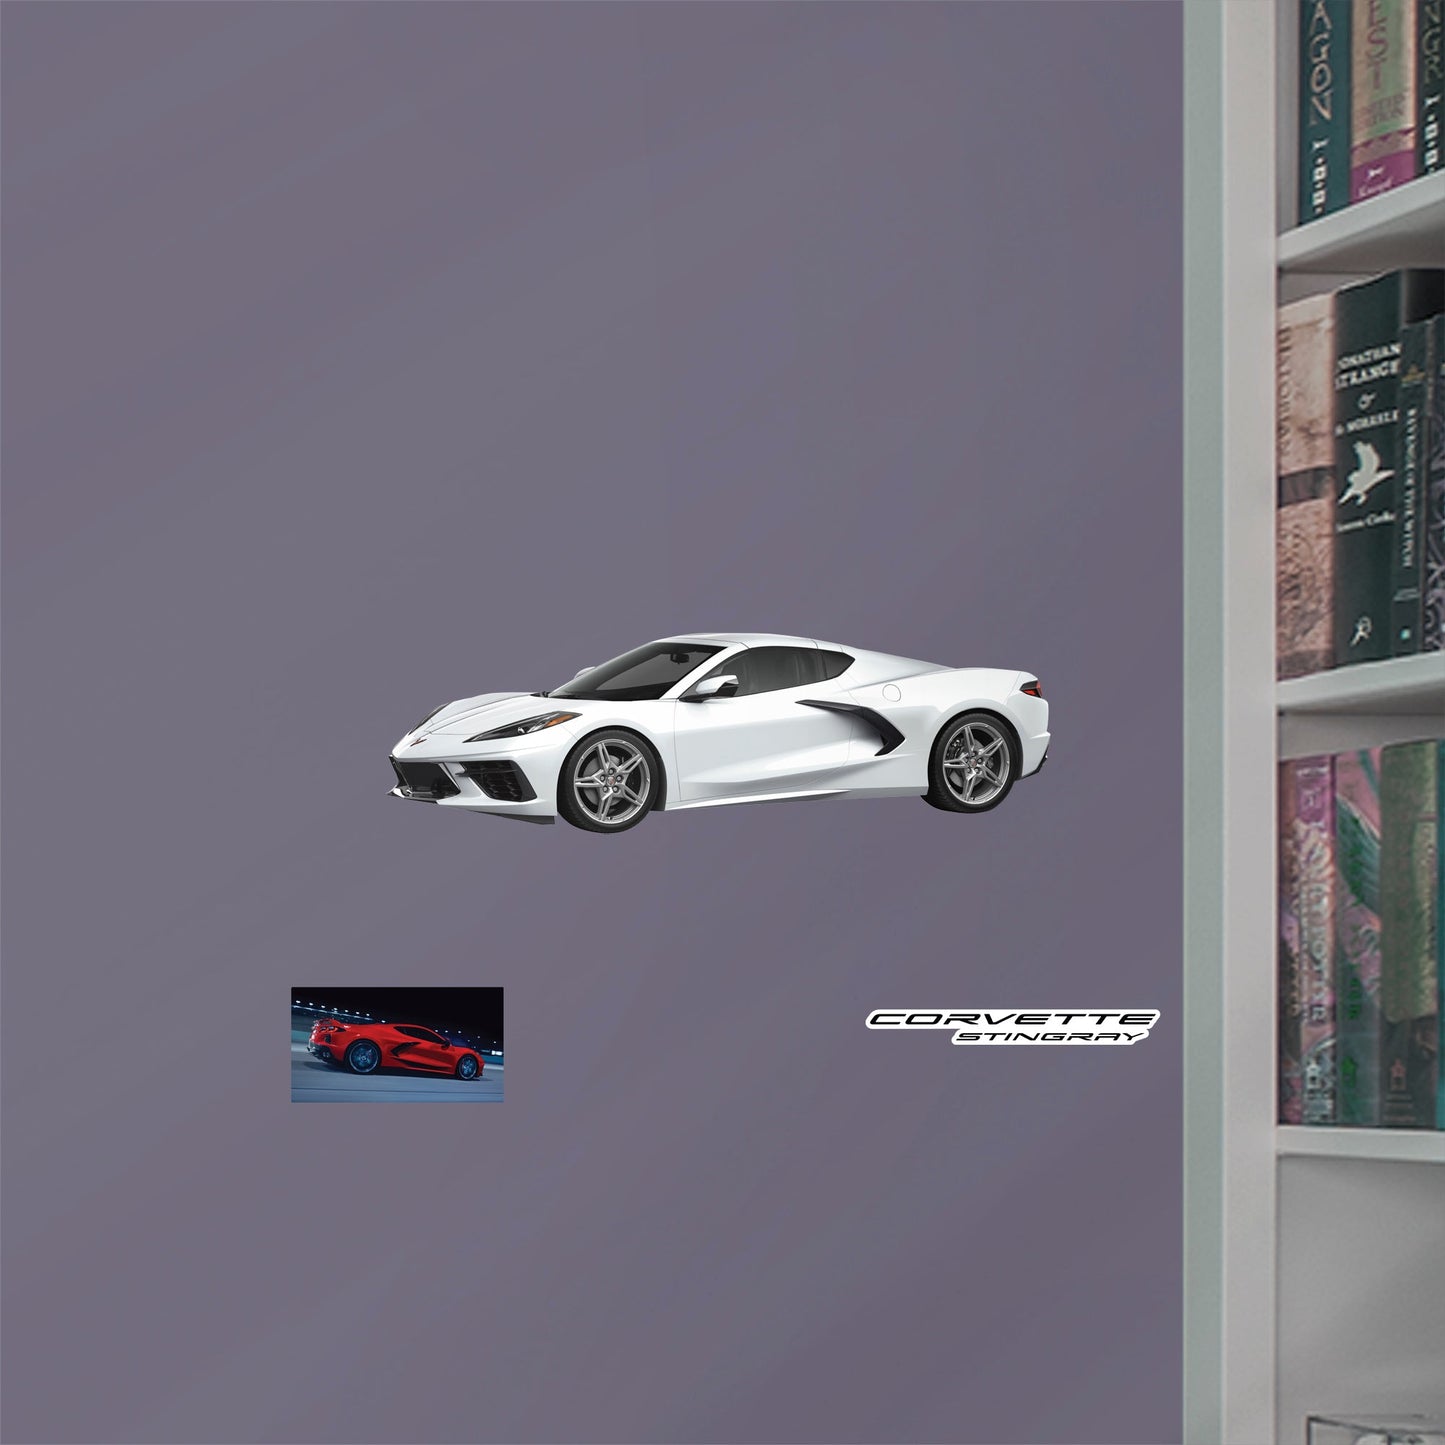 Chevrolet Corvette White Stingray: Officially Licensed GM Removable Wall Decal